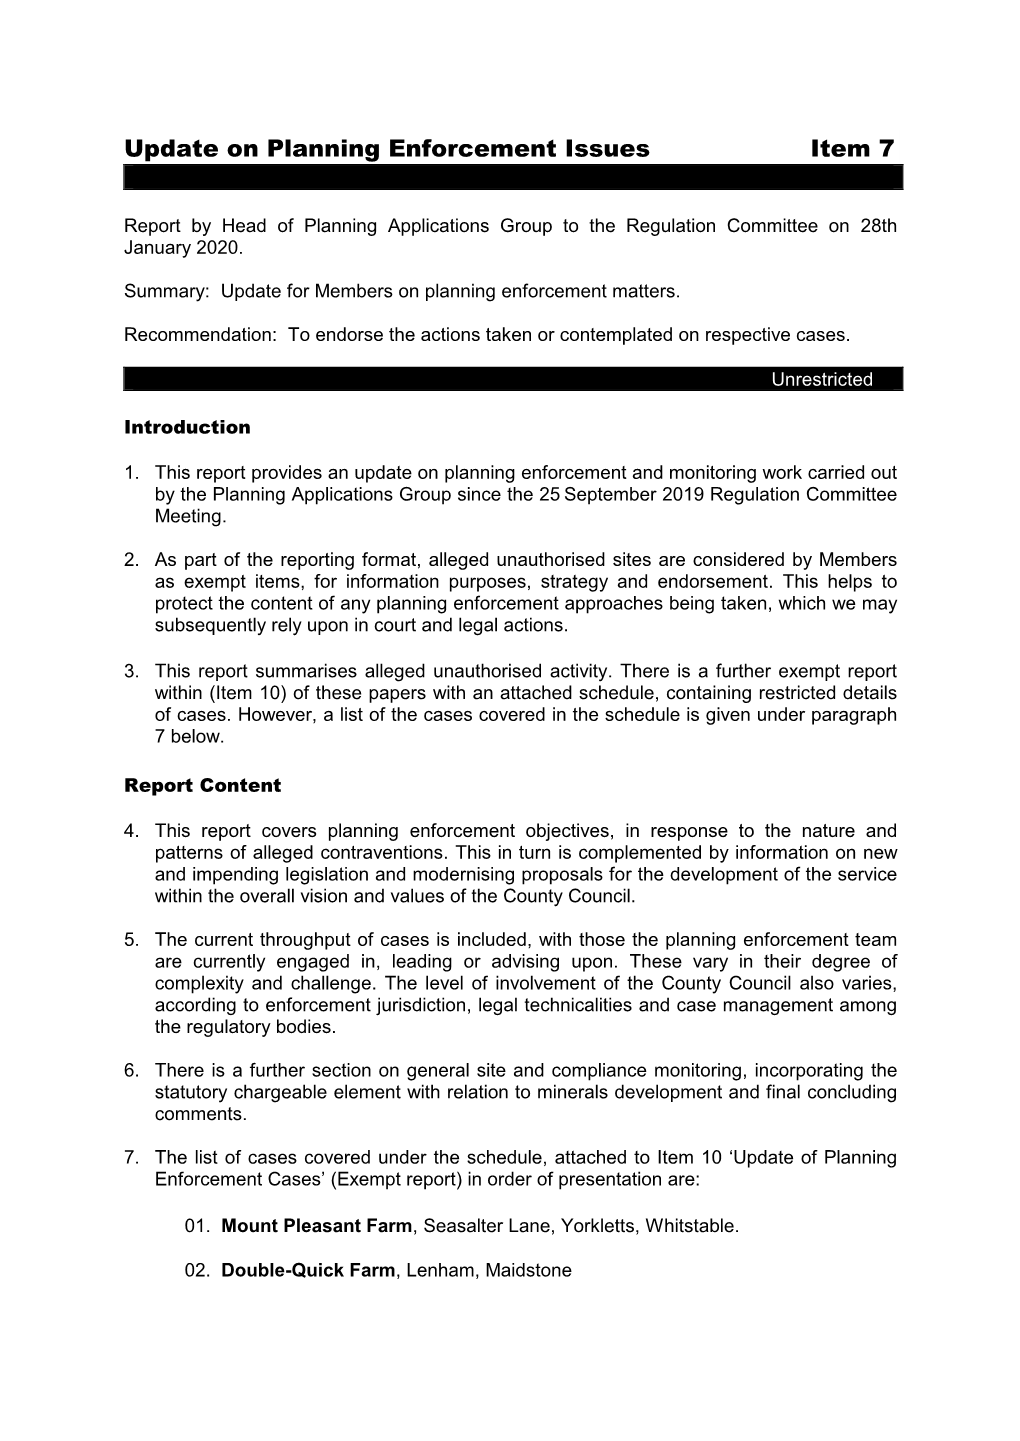 Update on Planning Enforcement Issues PDF 245 KB